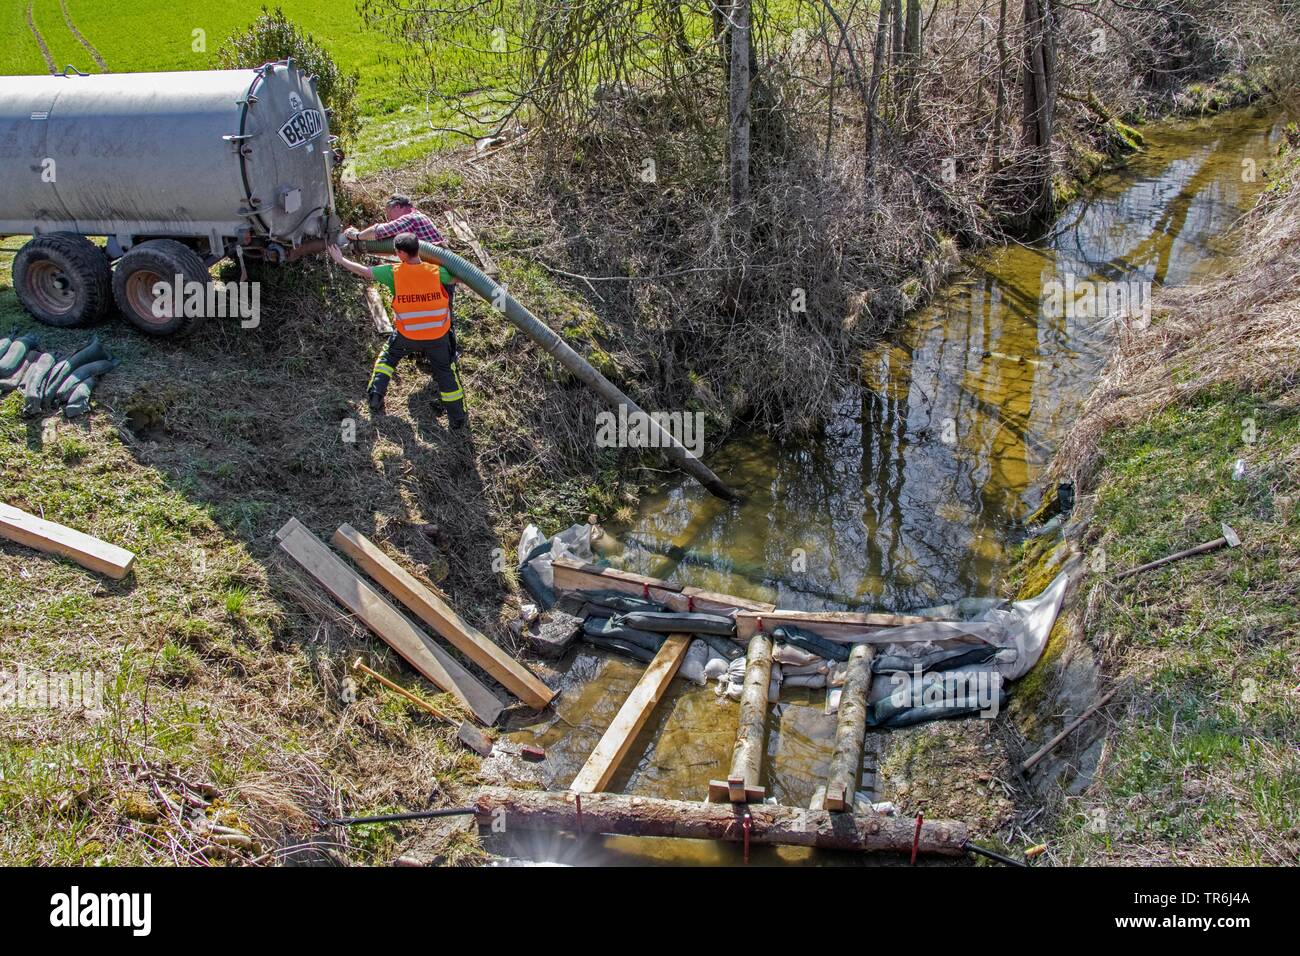 firefighter building a barrier in a creek after illegal discharge of manure, Germany, Bavaria Stock Photo